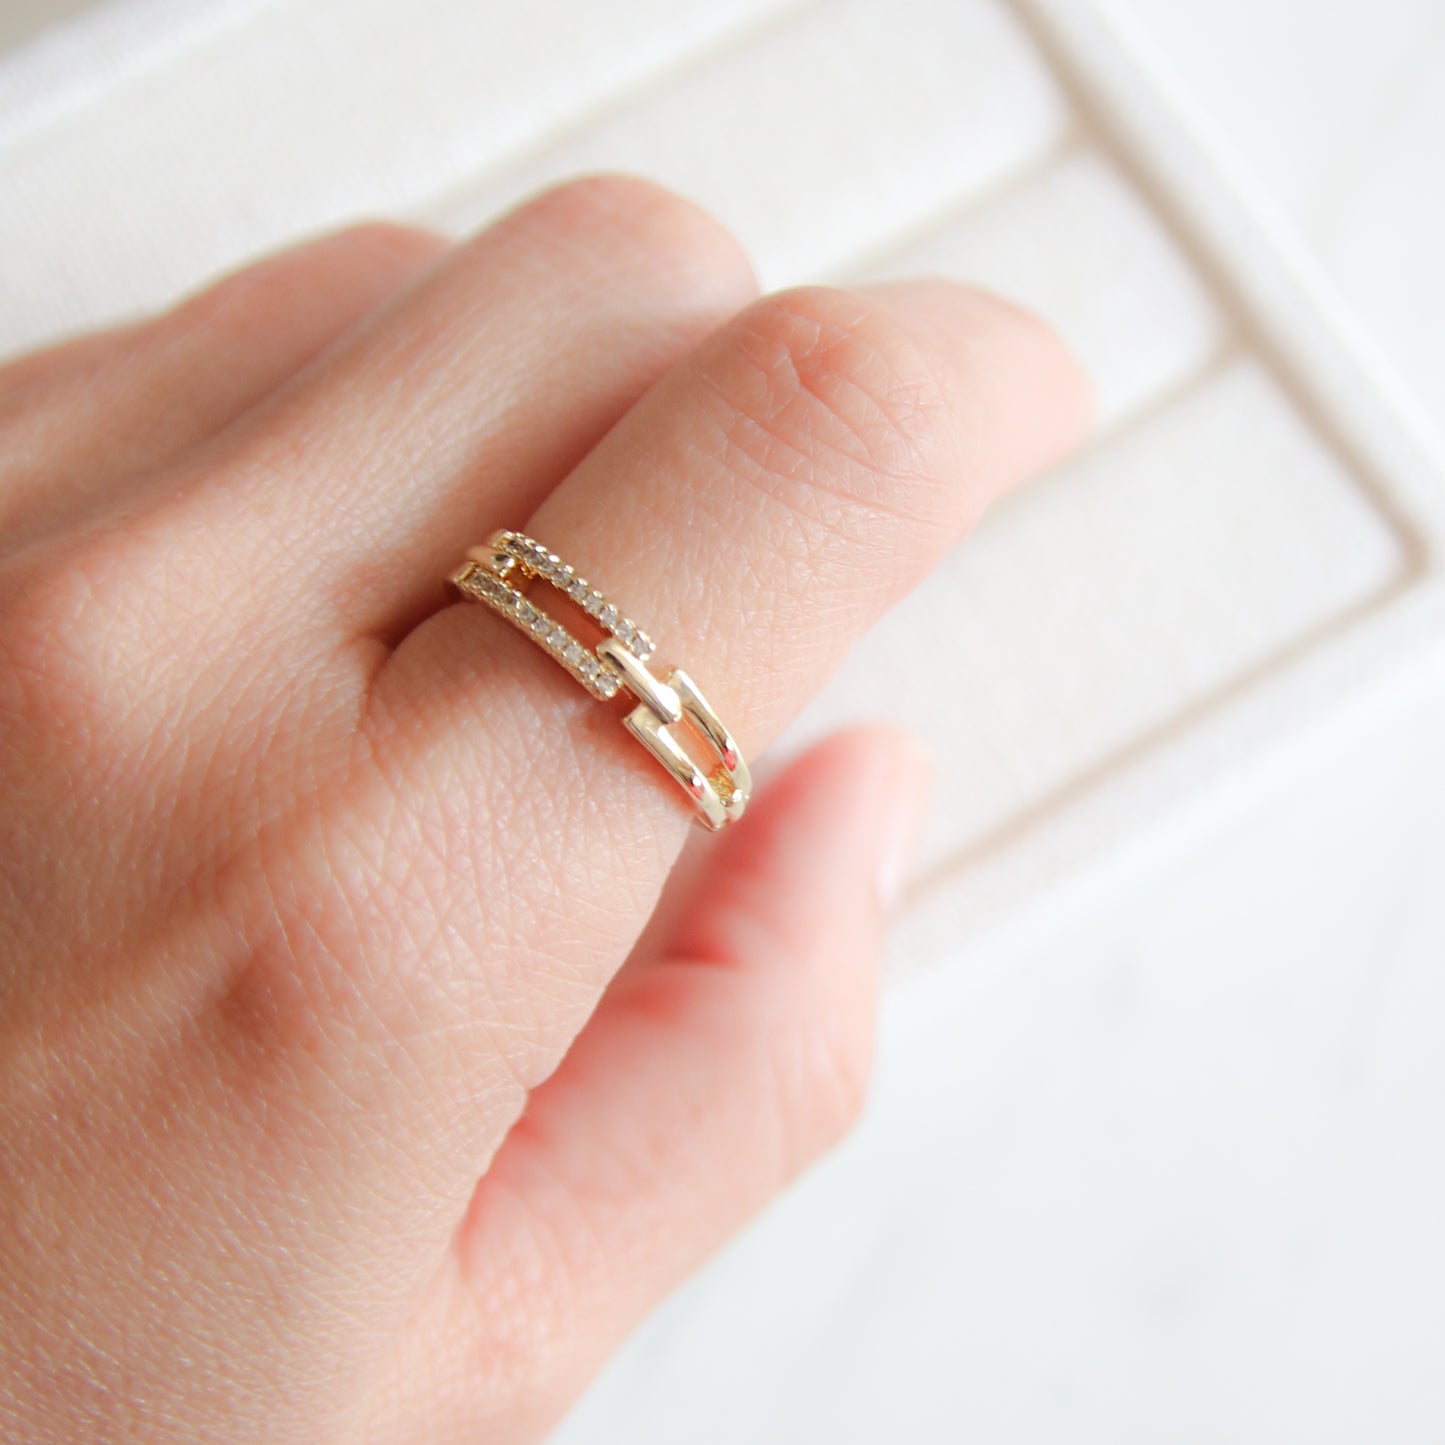 Pave Link Ring